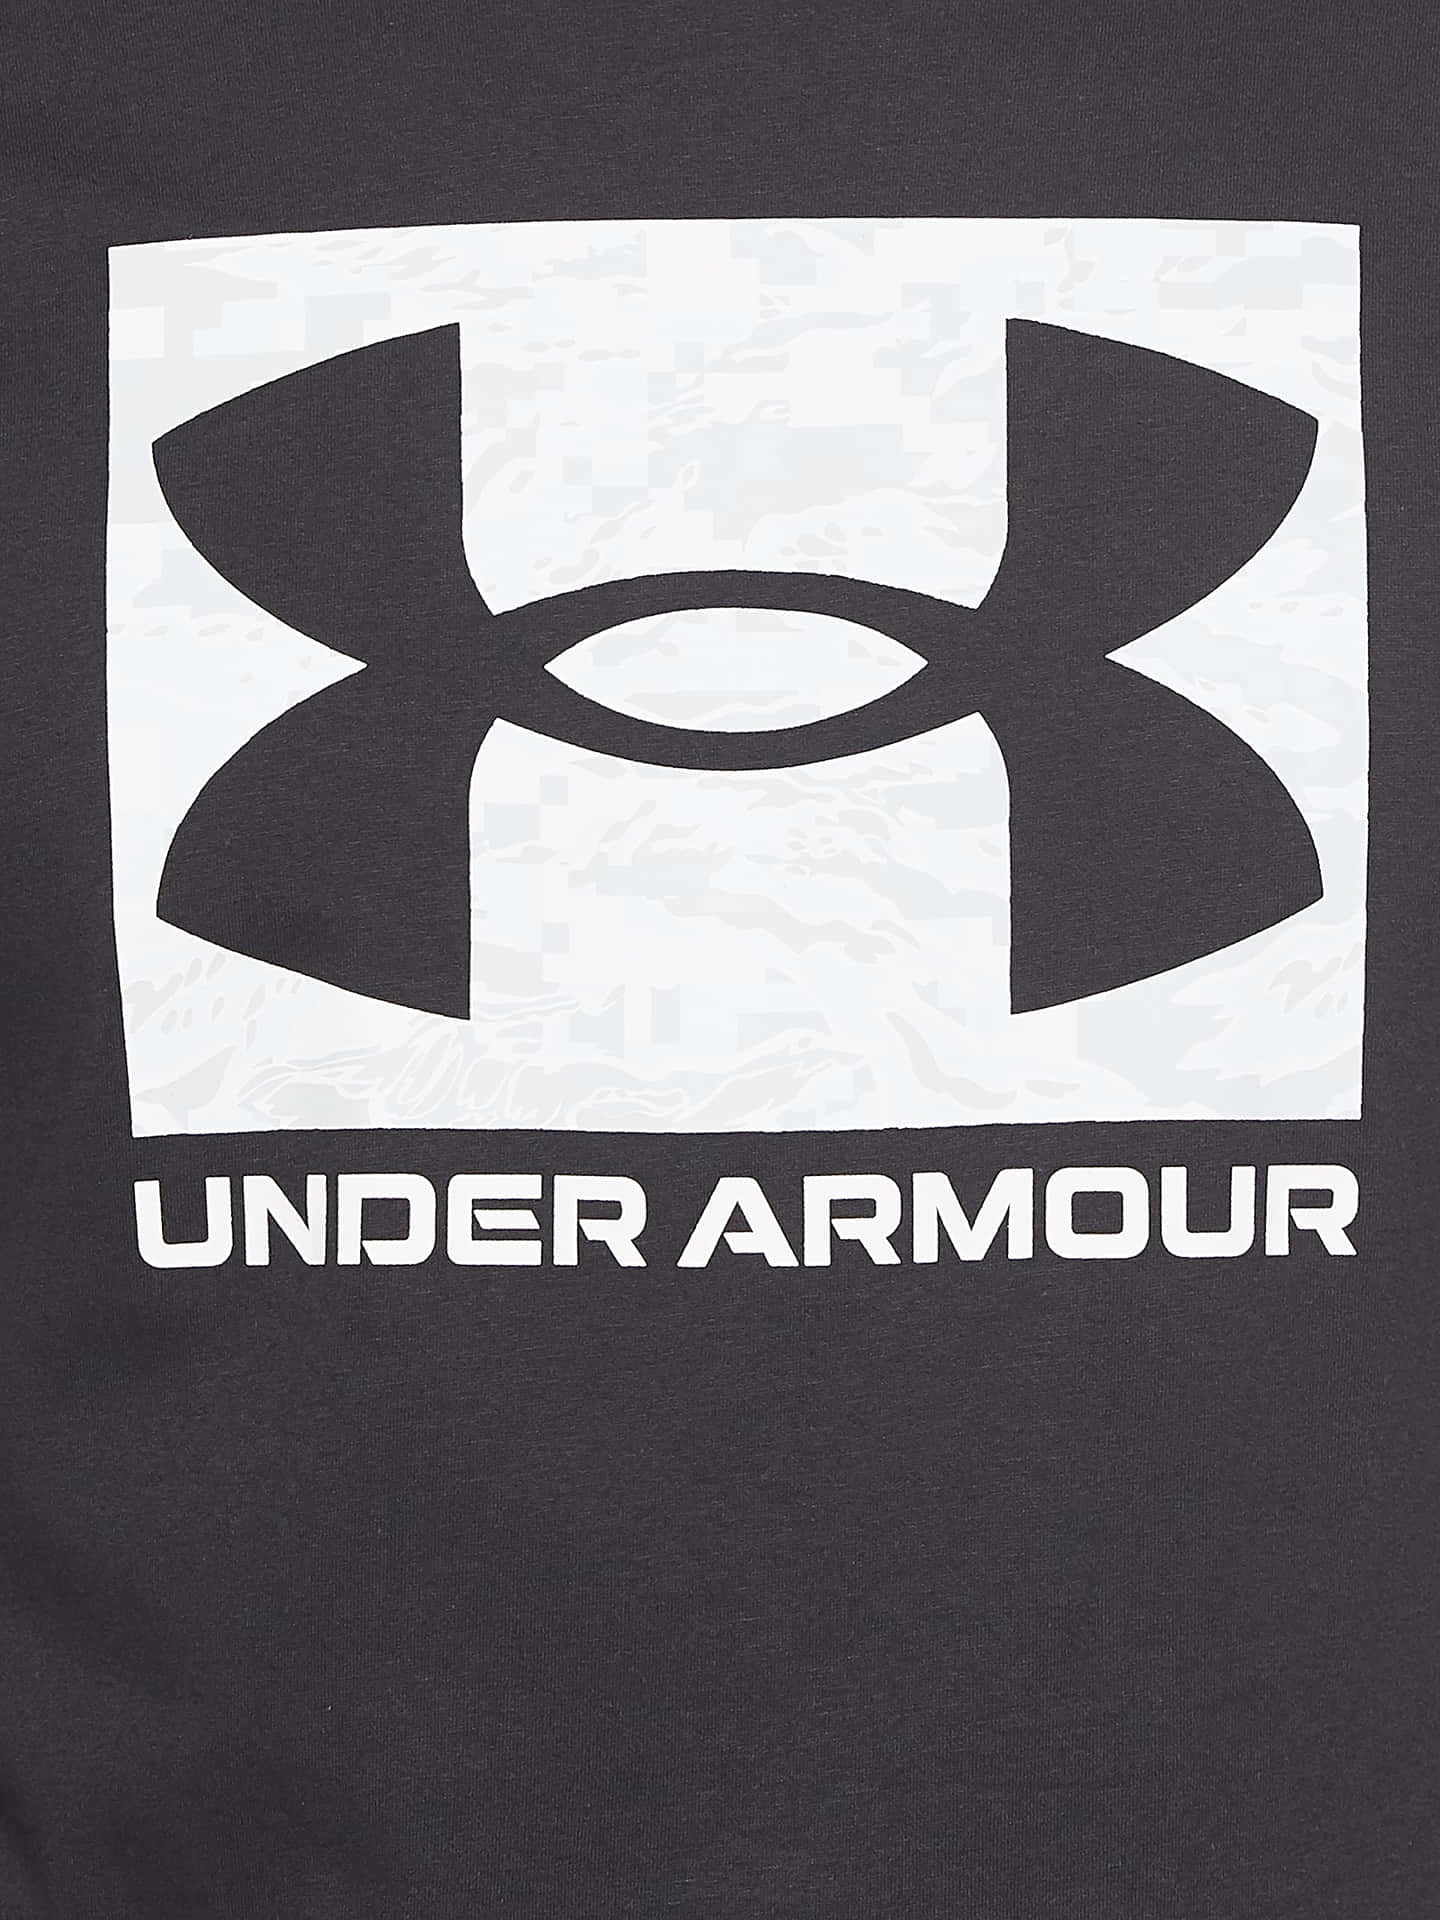 "Unlock Your Potential With Under Armour"